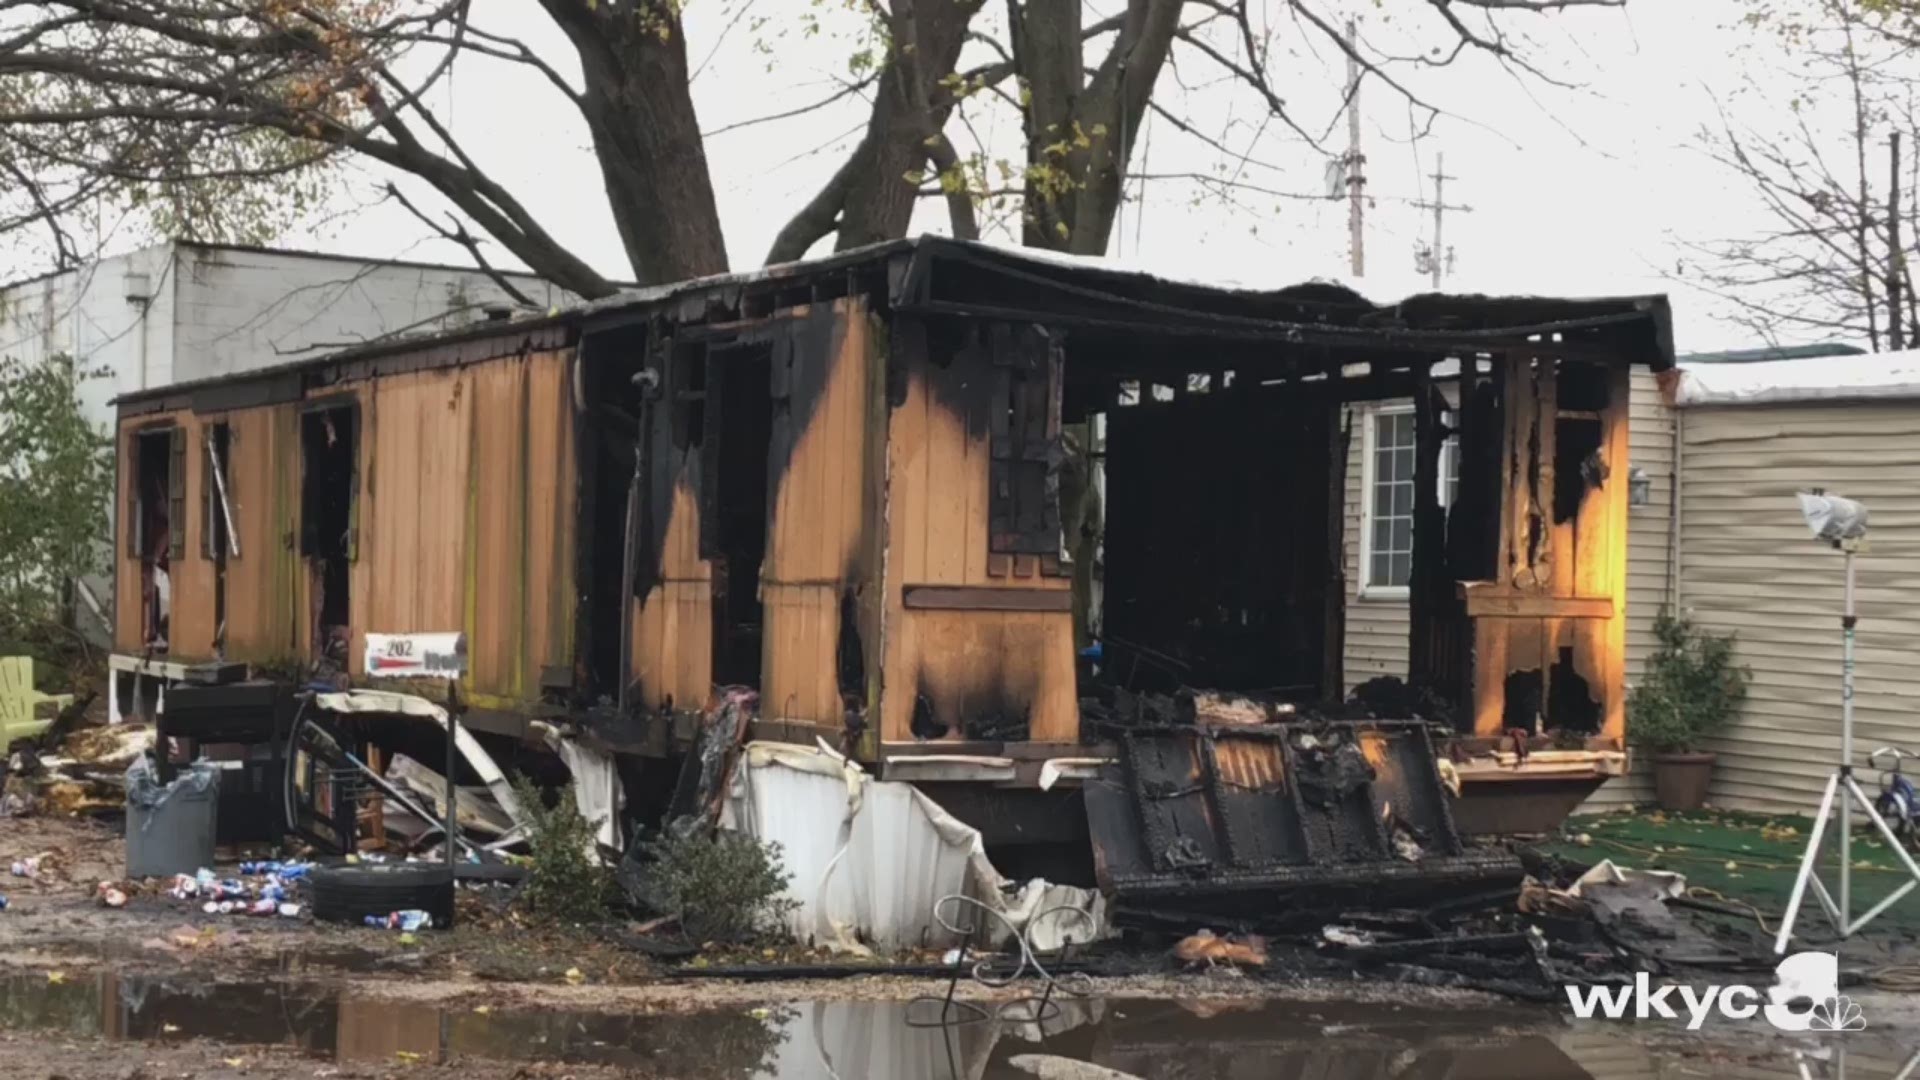 Nov. 15, 2018: Authorities say three people were hurt in this fire at a mobile home park in Lake County.